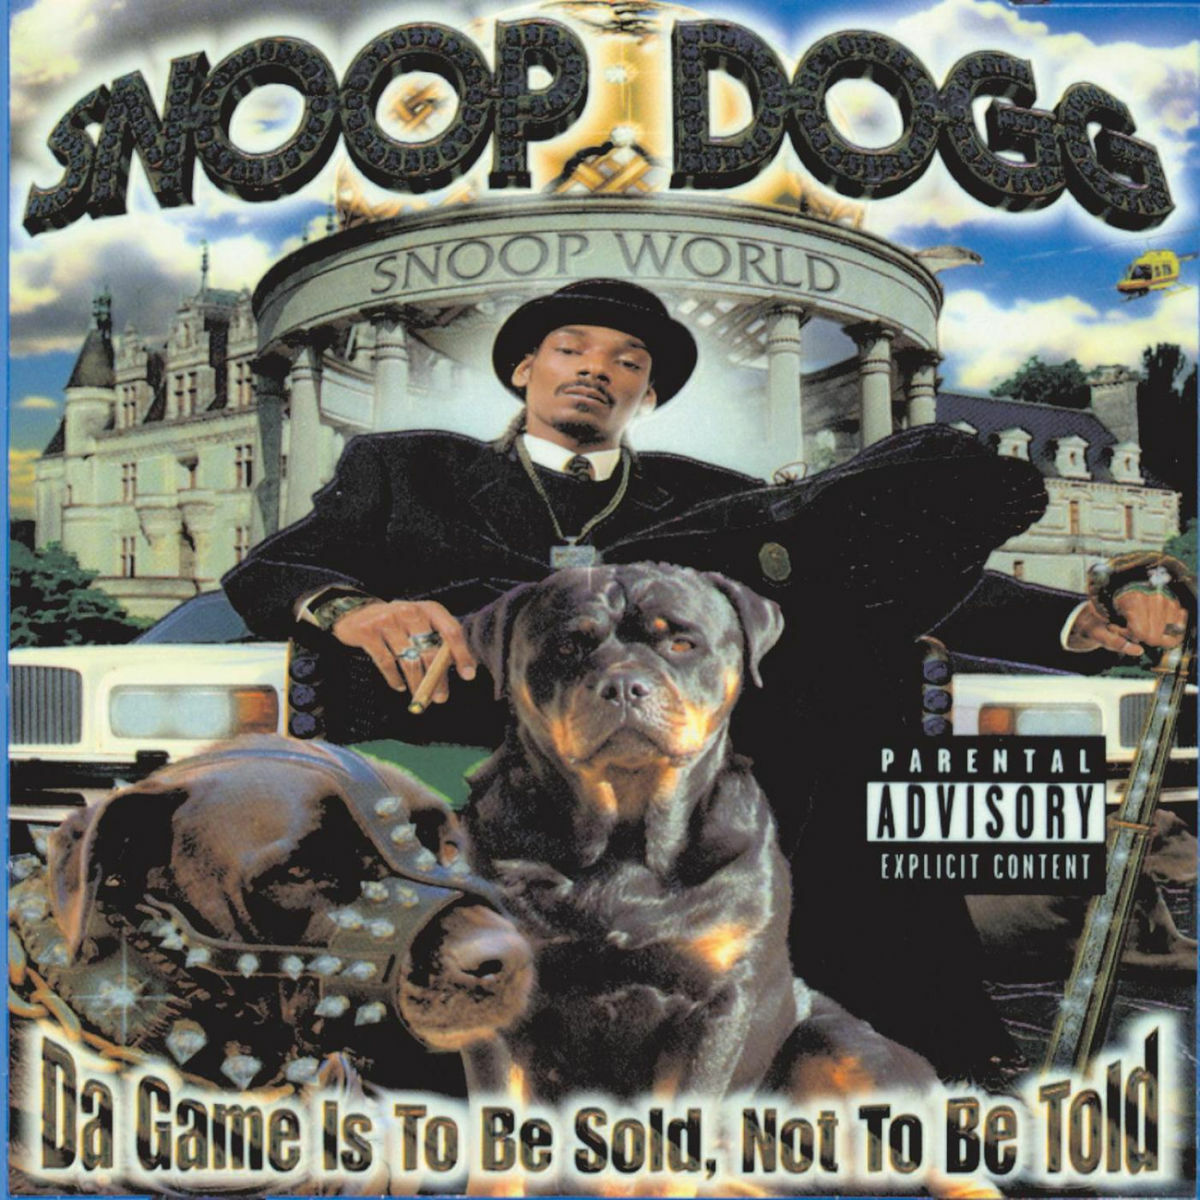 Snoop Dogg - Da Game Is To Be Sold, Not To Be Told: lyrics and 